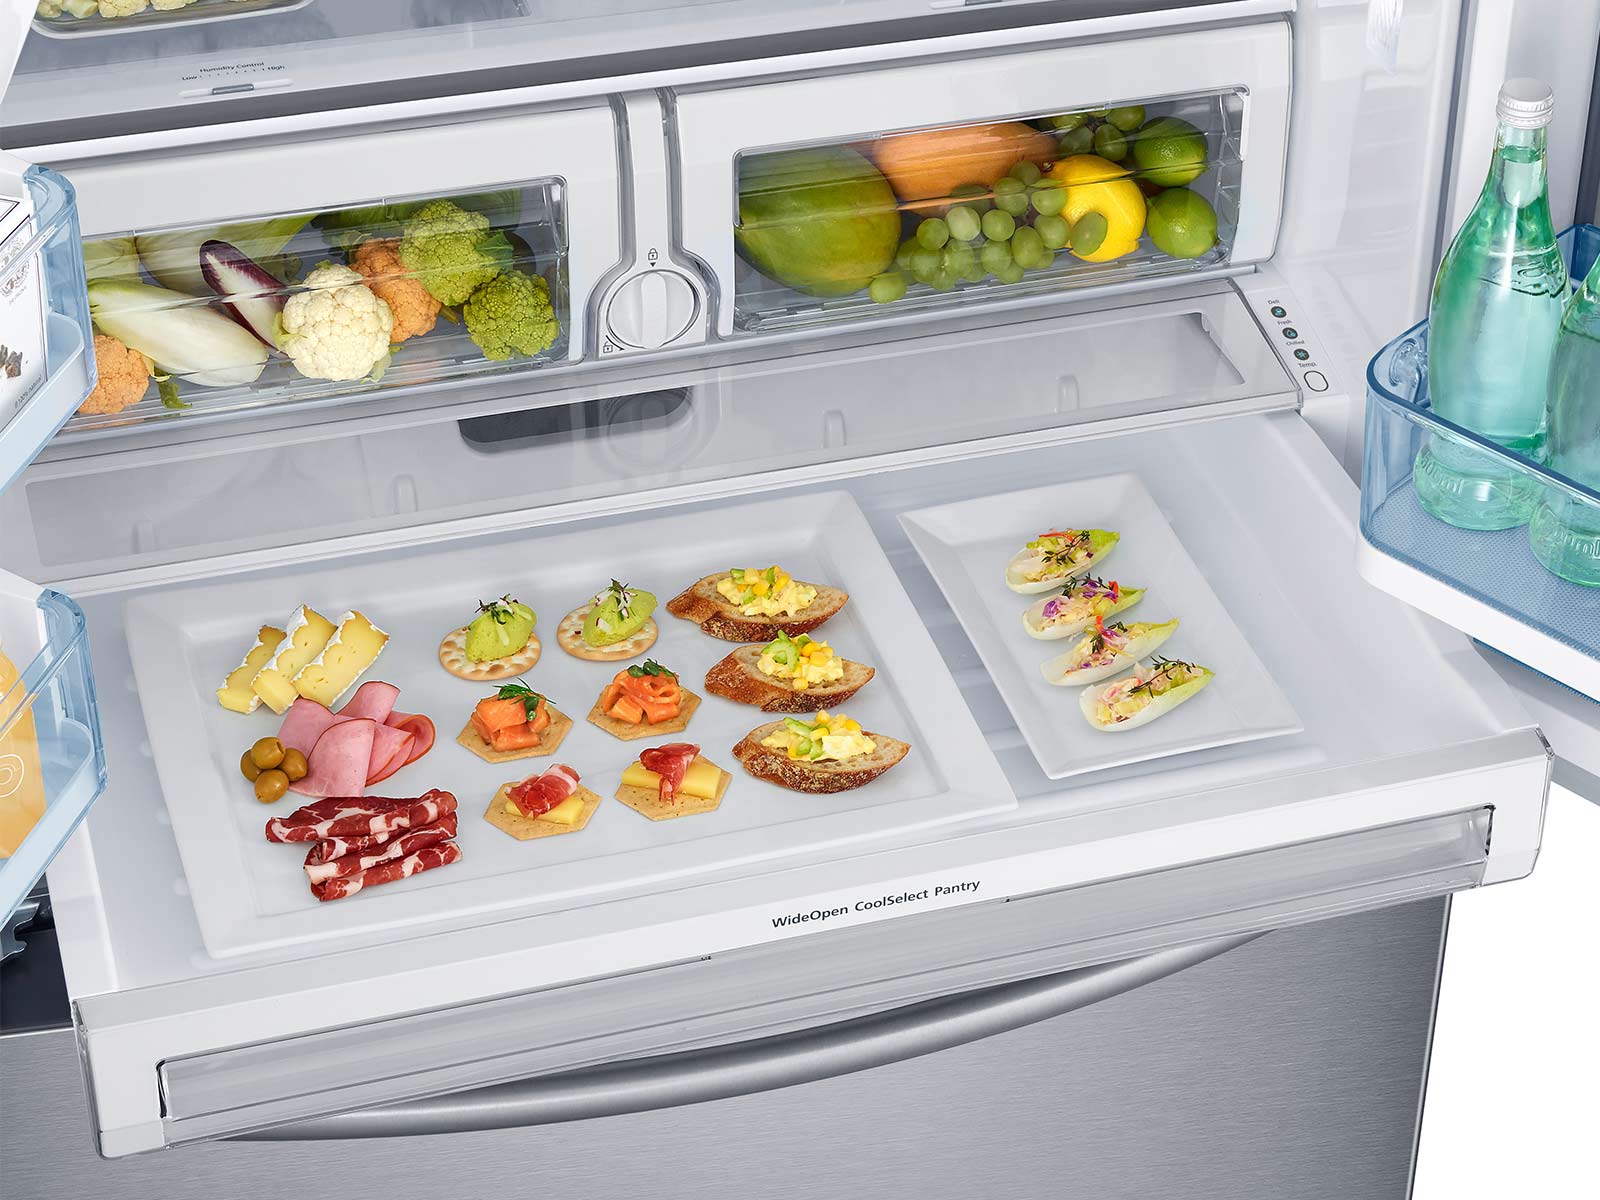 Thumbnail image of 28 cu. ft. 3-Door French Door Food ShowCase Refrigerator with Dual Ice Maker